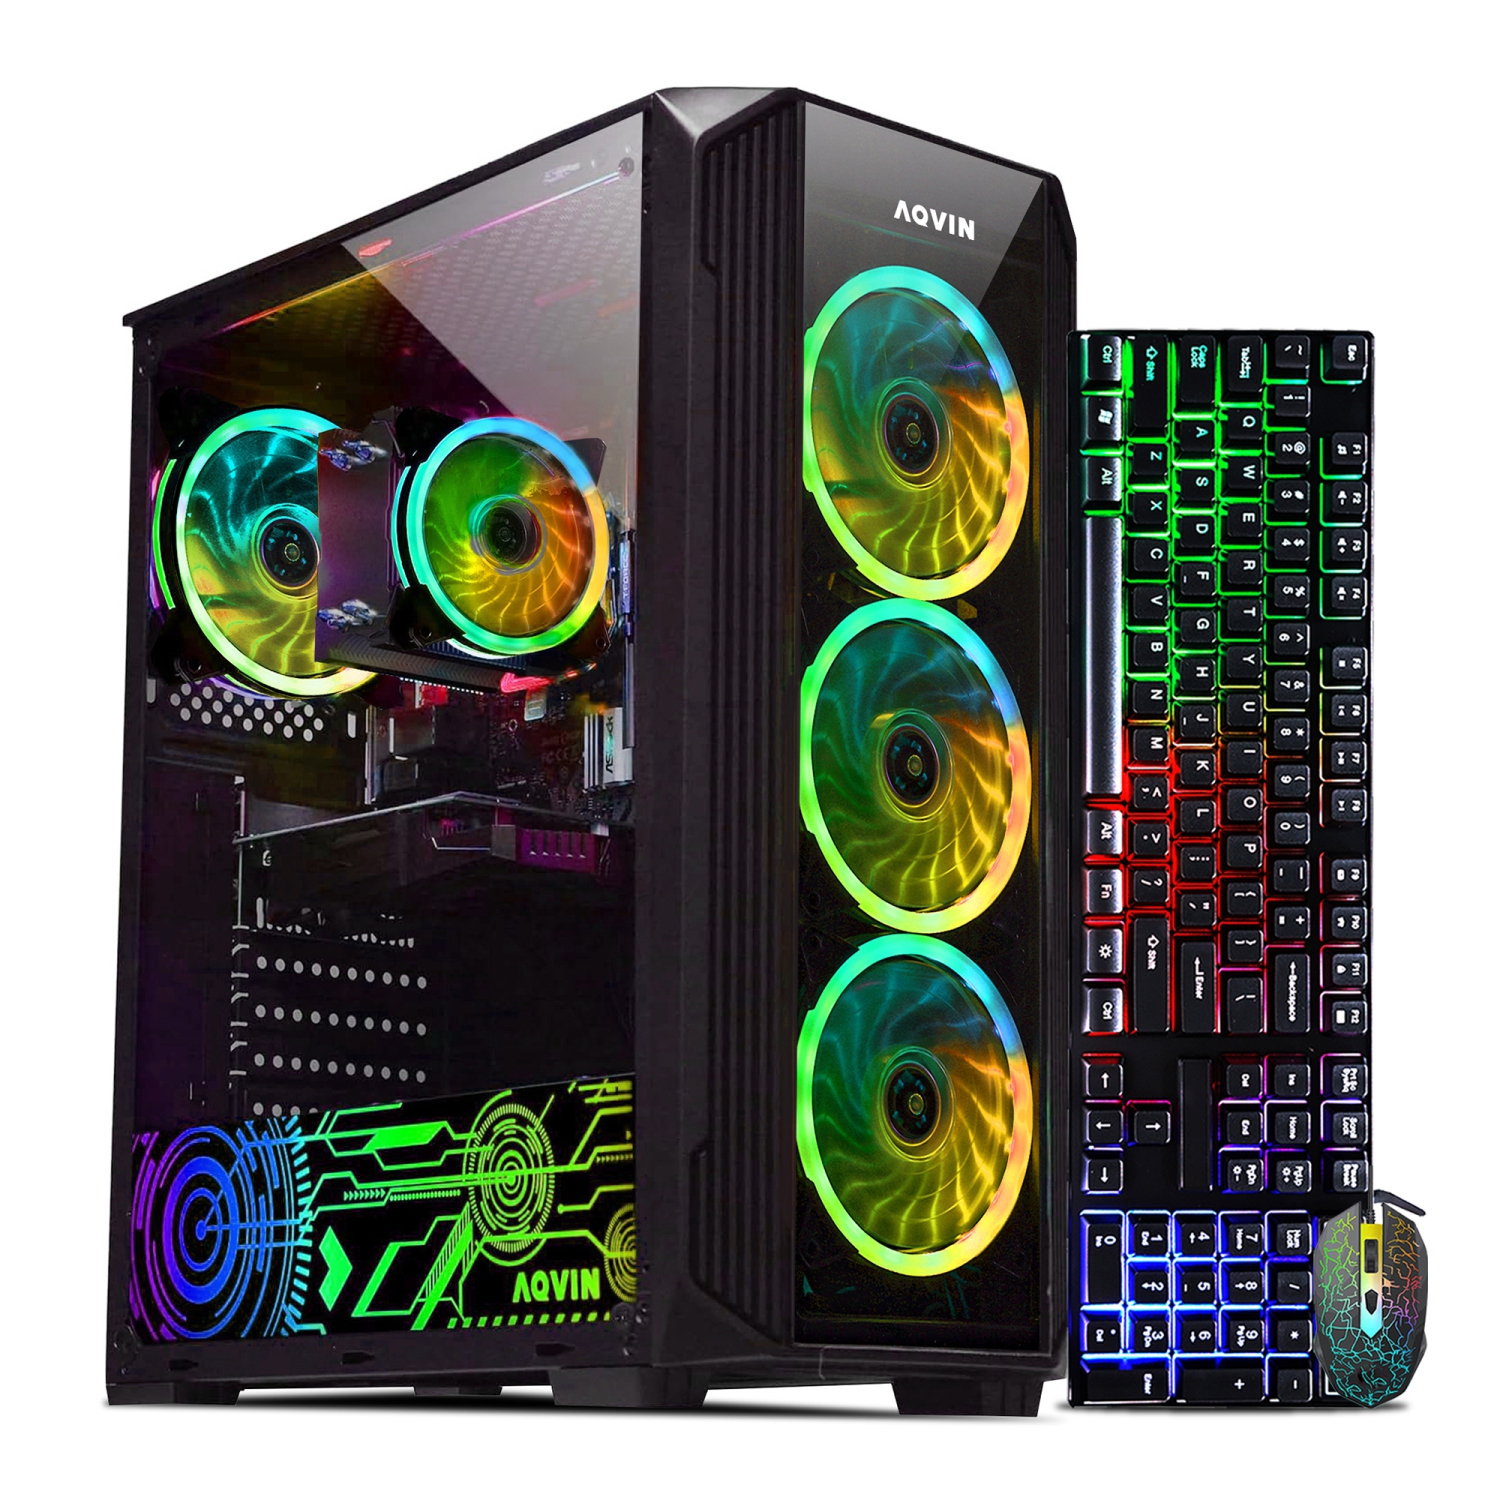 AQVIN ZForce Tower Desktop Computer Gaming PC / Intel Core i5 processor upto 4.00 GHz, 32GB DDR4 RAM, 1TB SSD, GeForce GTX 1660 Super 6GB, Windows 11, RGB Gaming Keyboard and Mouse